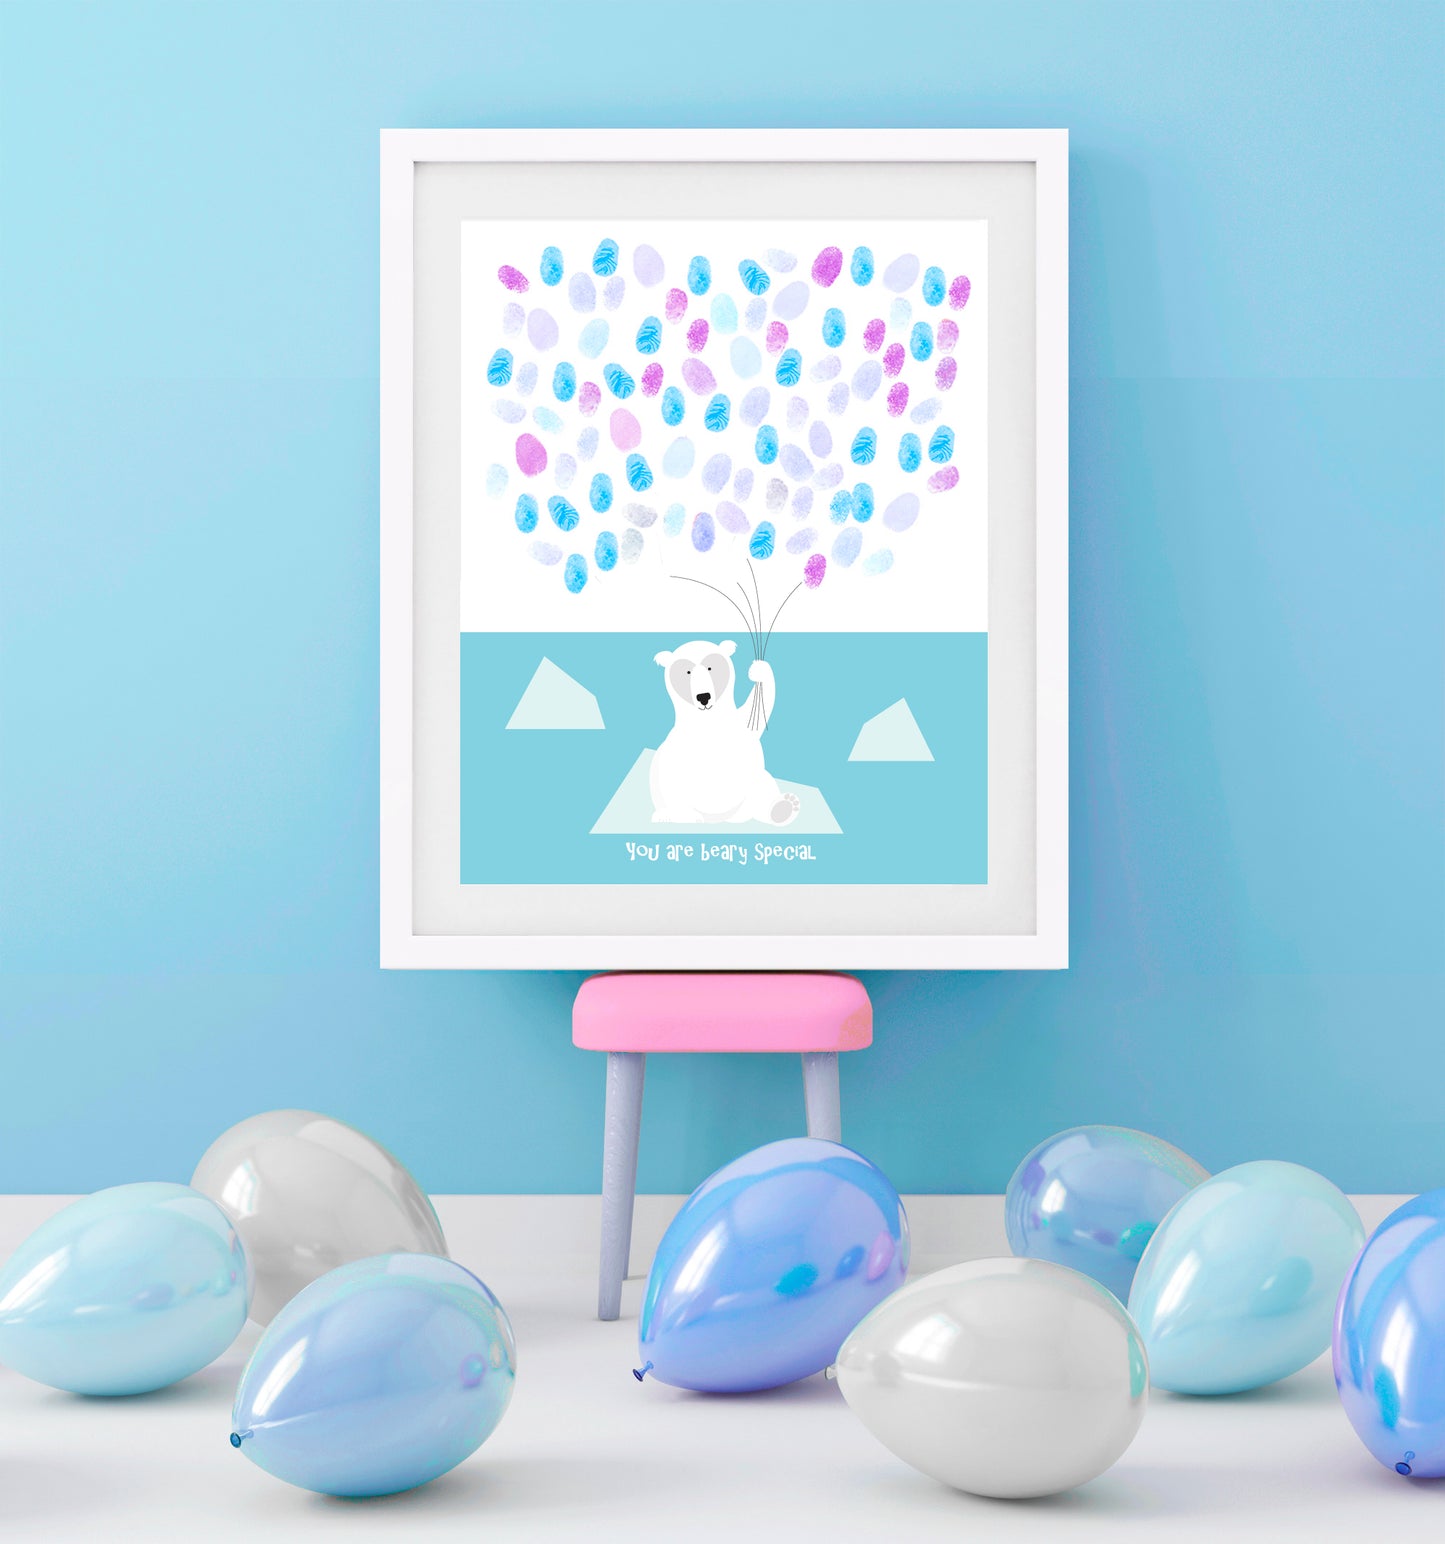 polar bear print in frame as a party guest book, polar bear sitting on ice holding balloons which are guests fingerprints